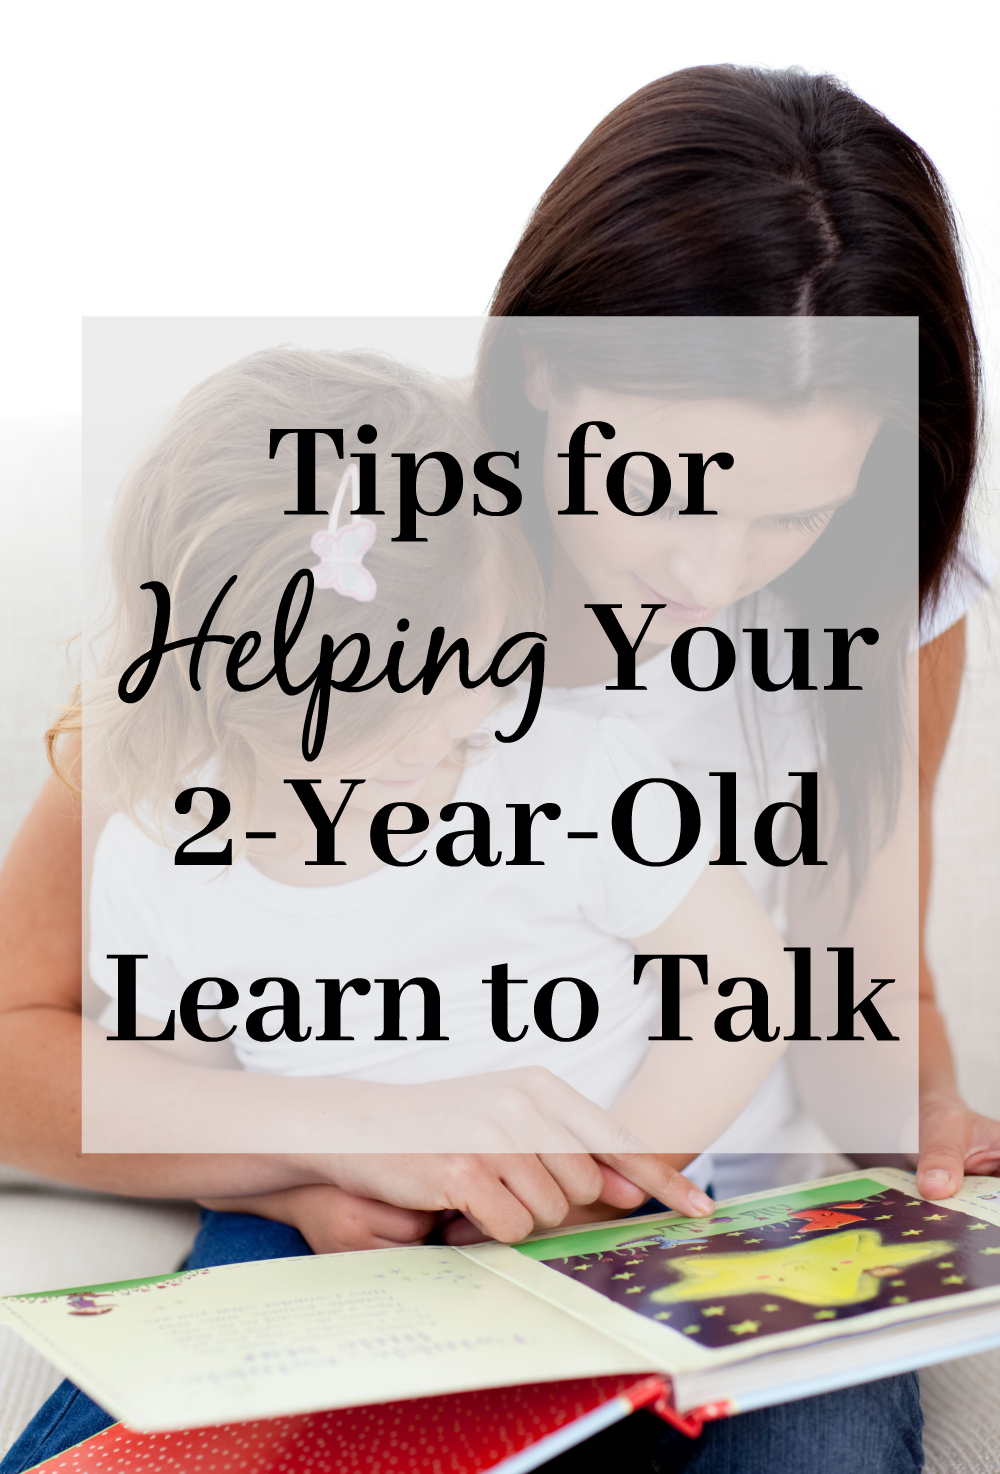 Tips for Helping Your 2-Year-Old Learn to Talk